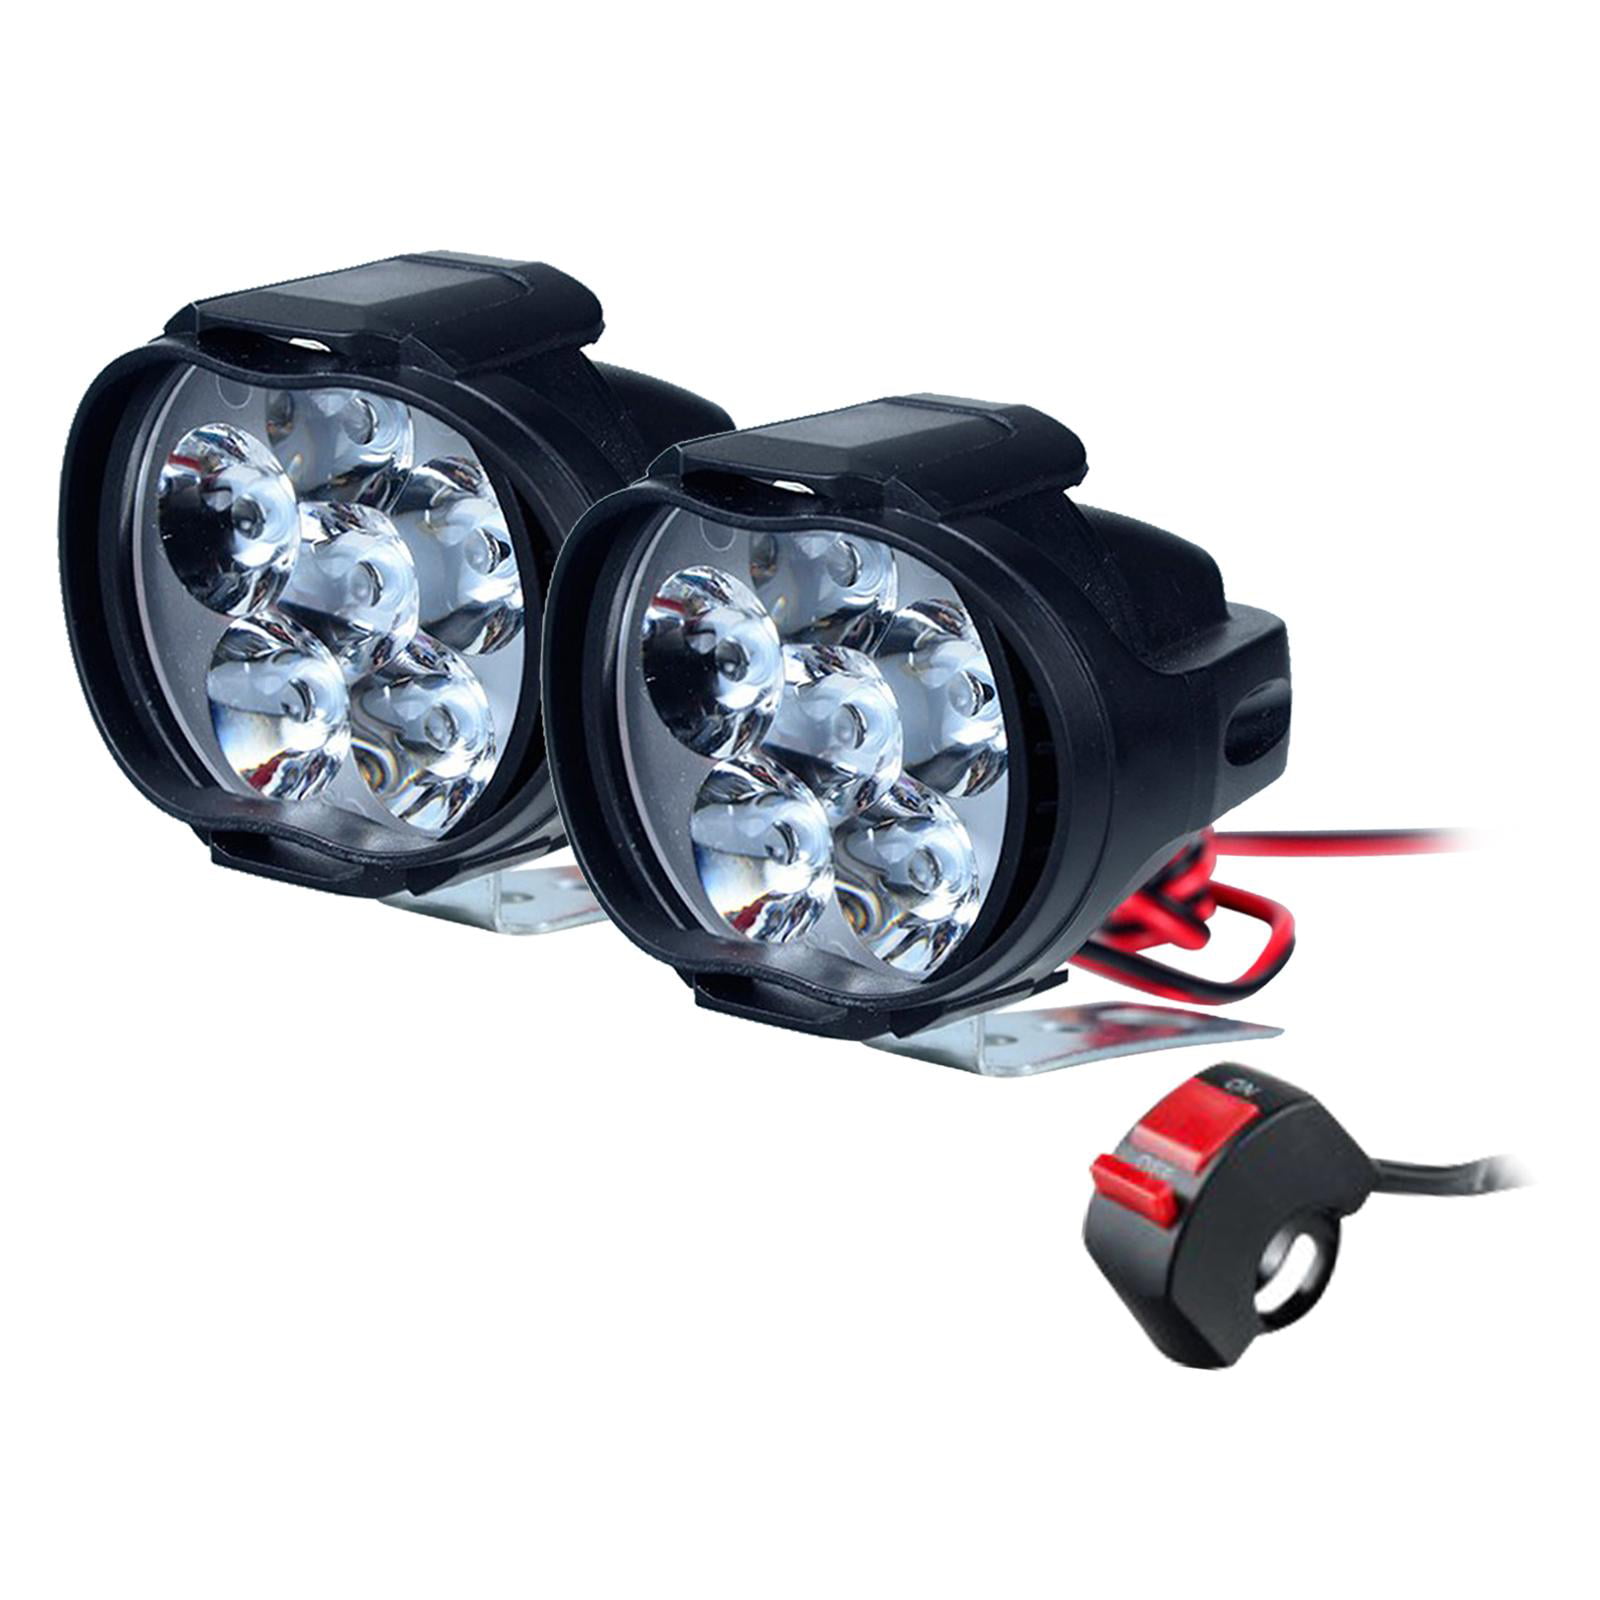 2011 Ford TAURUS Post mount spotlight Driver side WITH install kit -Black 6 inch 100W Halogen 